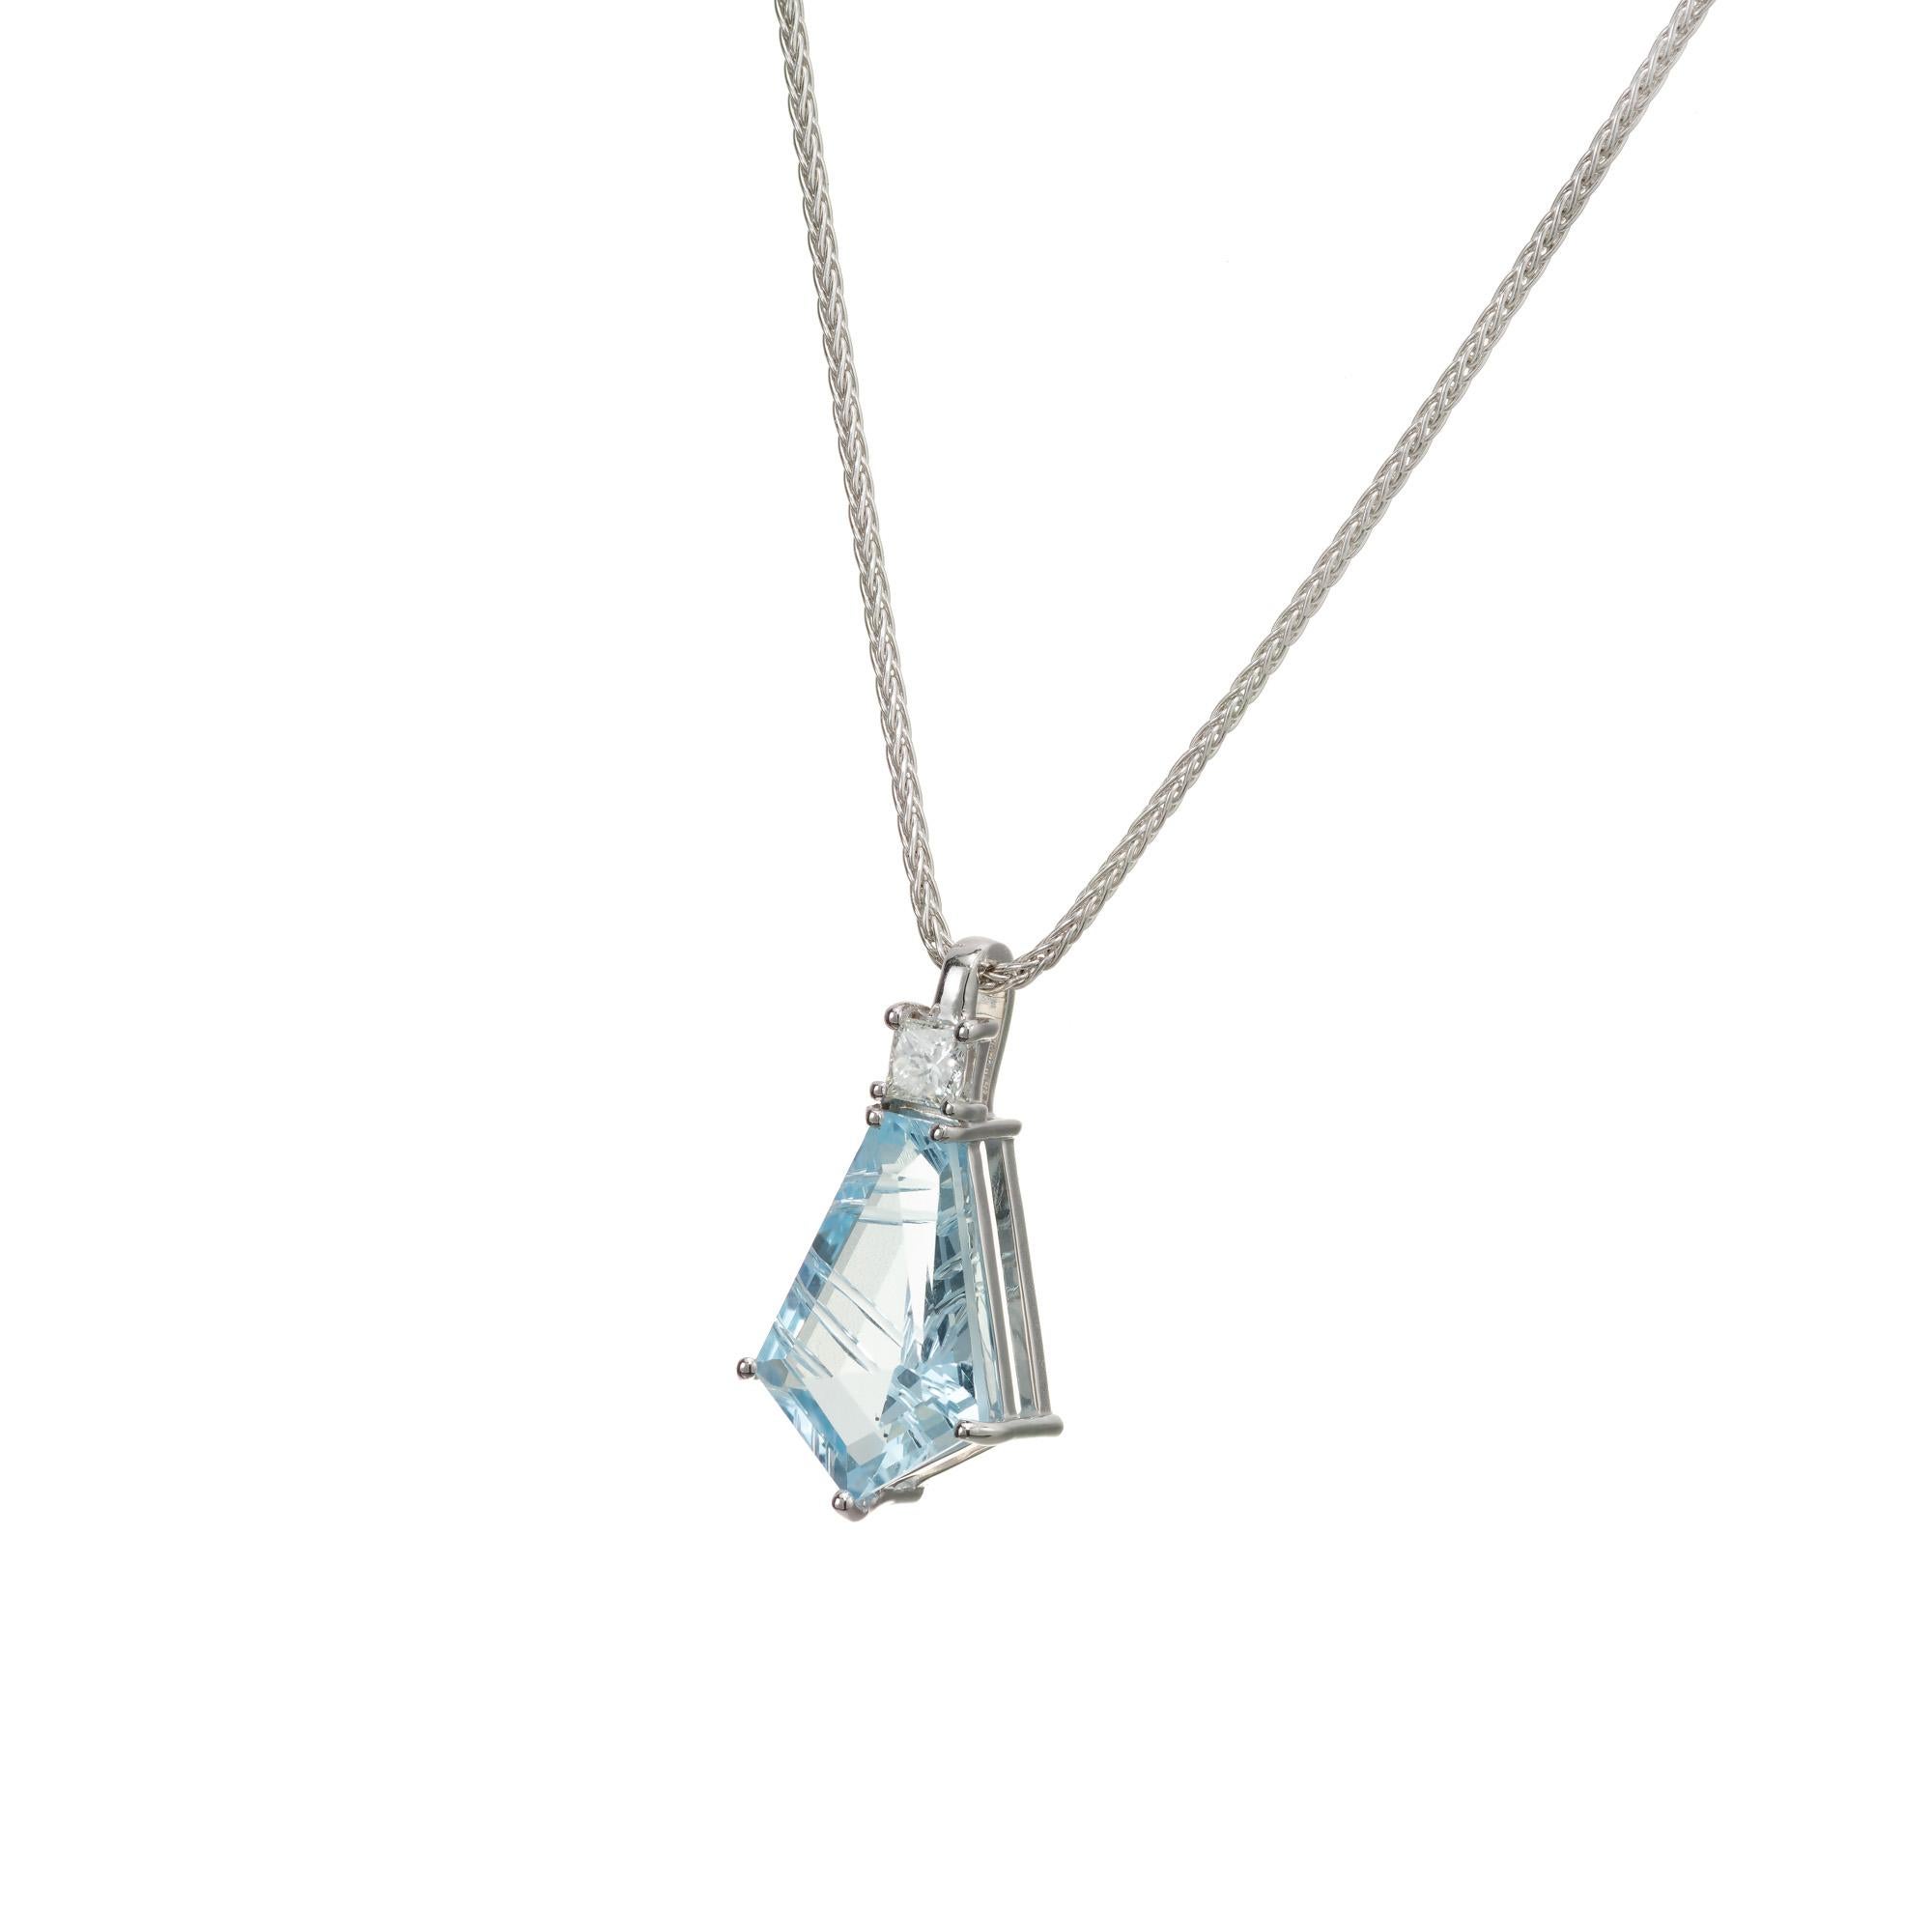 Aqua and diamond pendant necklace. 3.70 carat kite shaped fantasy cut aqua with a princess cut accent diamond set in 14k white gold. 18 inch long. Designed and crafted in the Peter Suchy workshop

1 kite shaped blue aquamarine with cuts, approx.